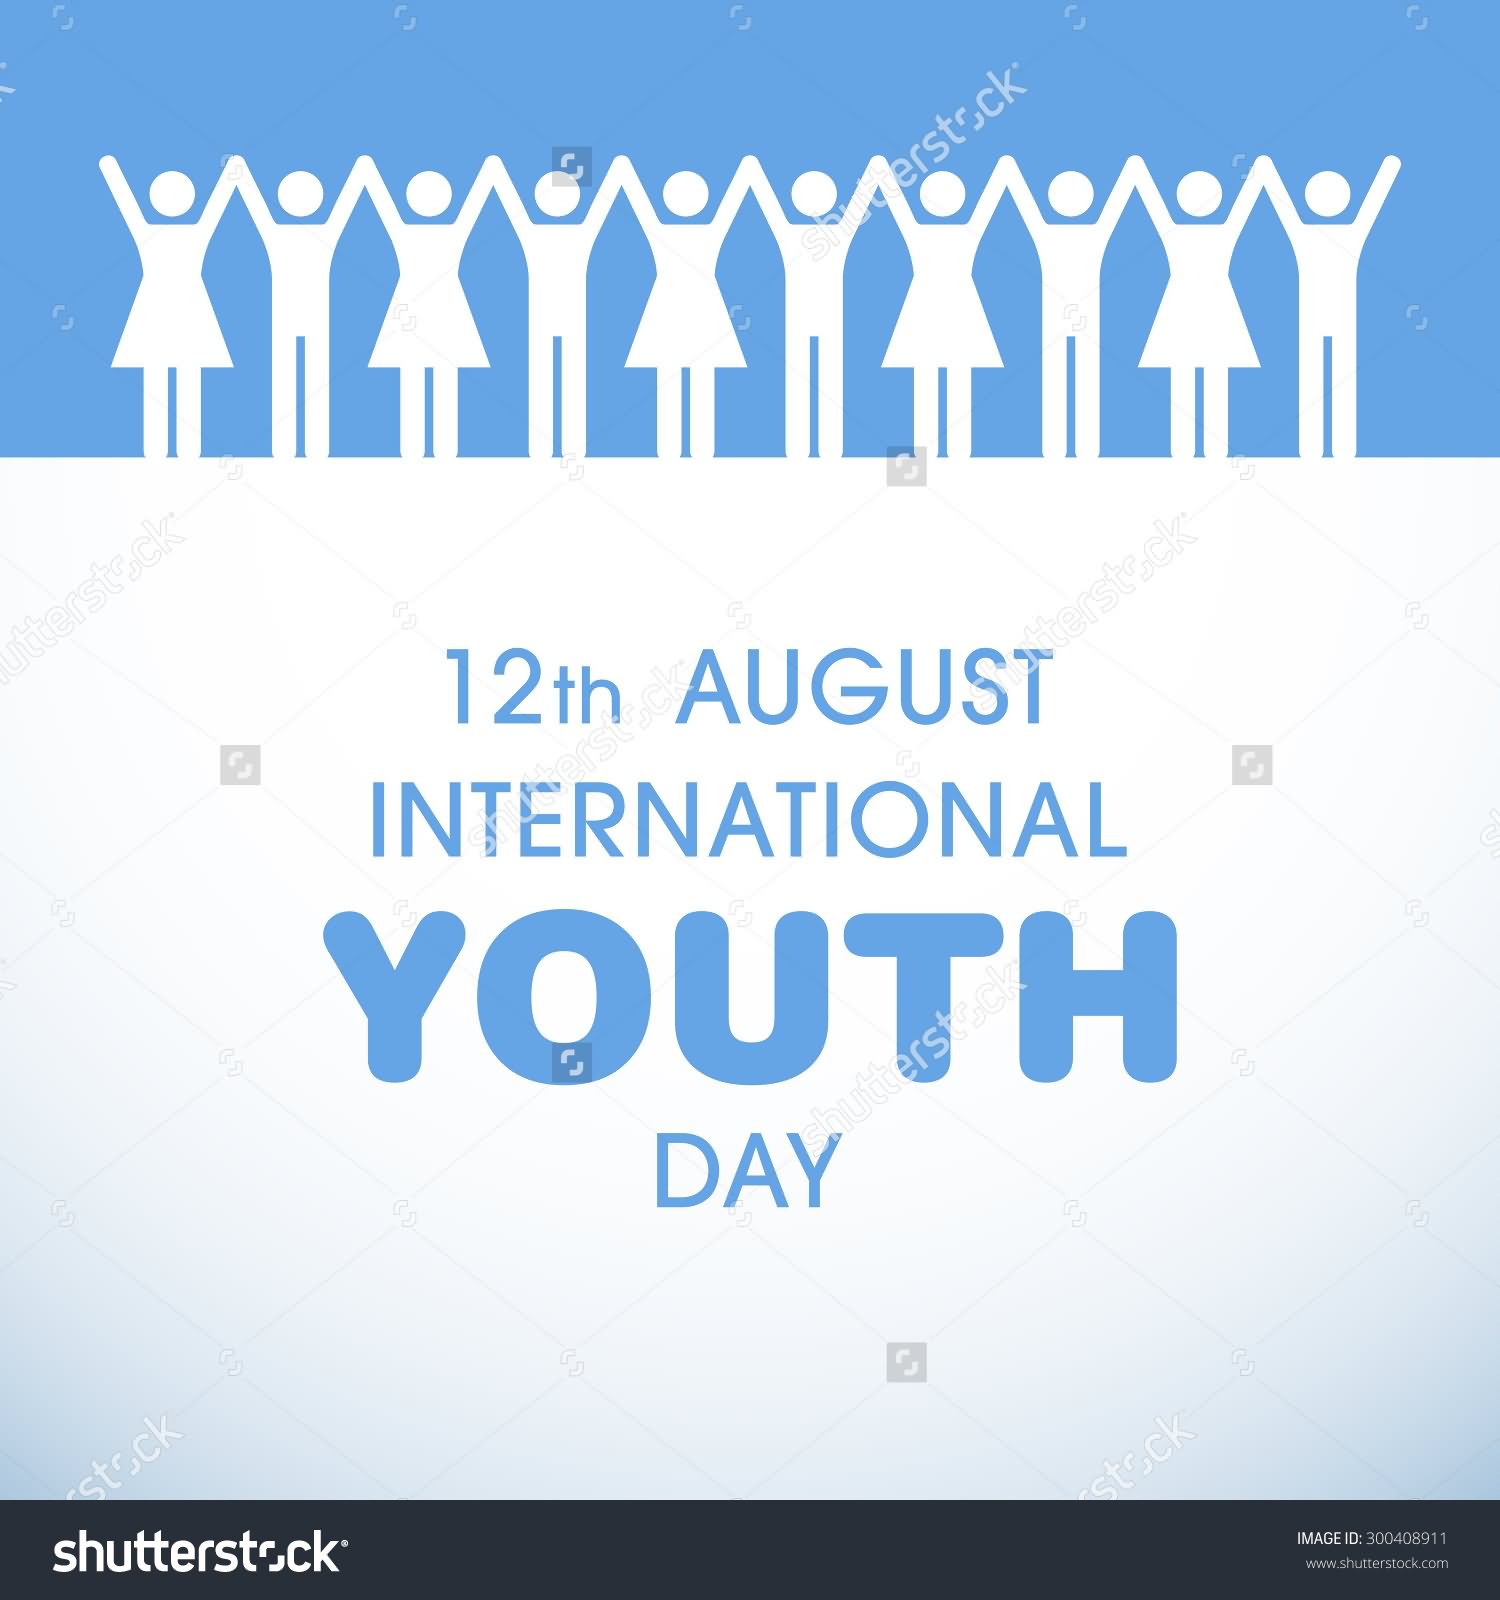 12th August International Youth Day Picture